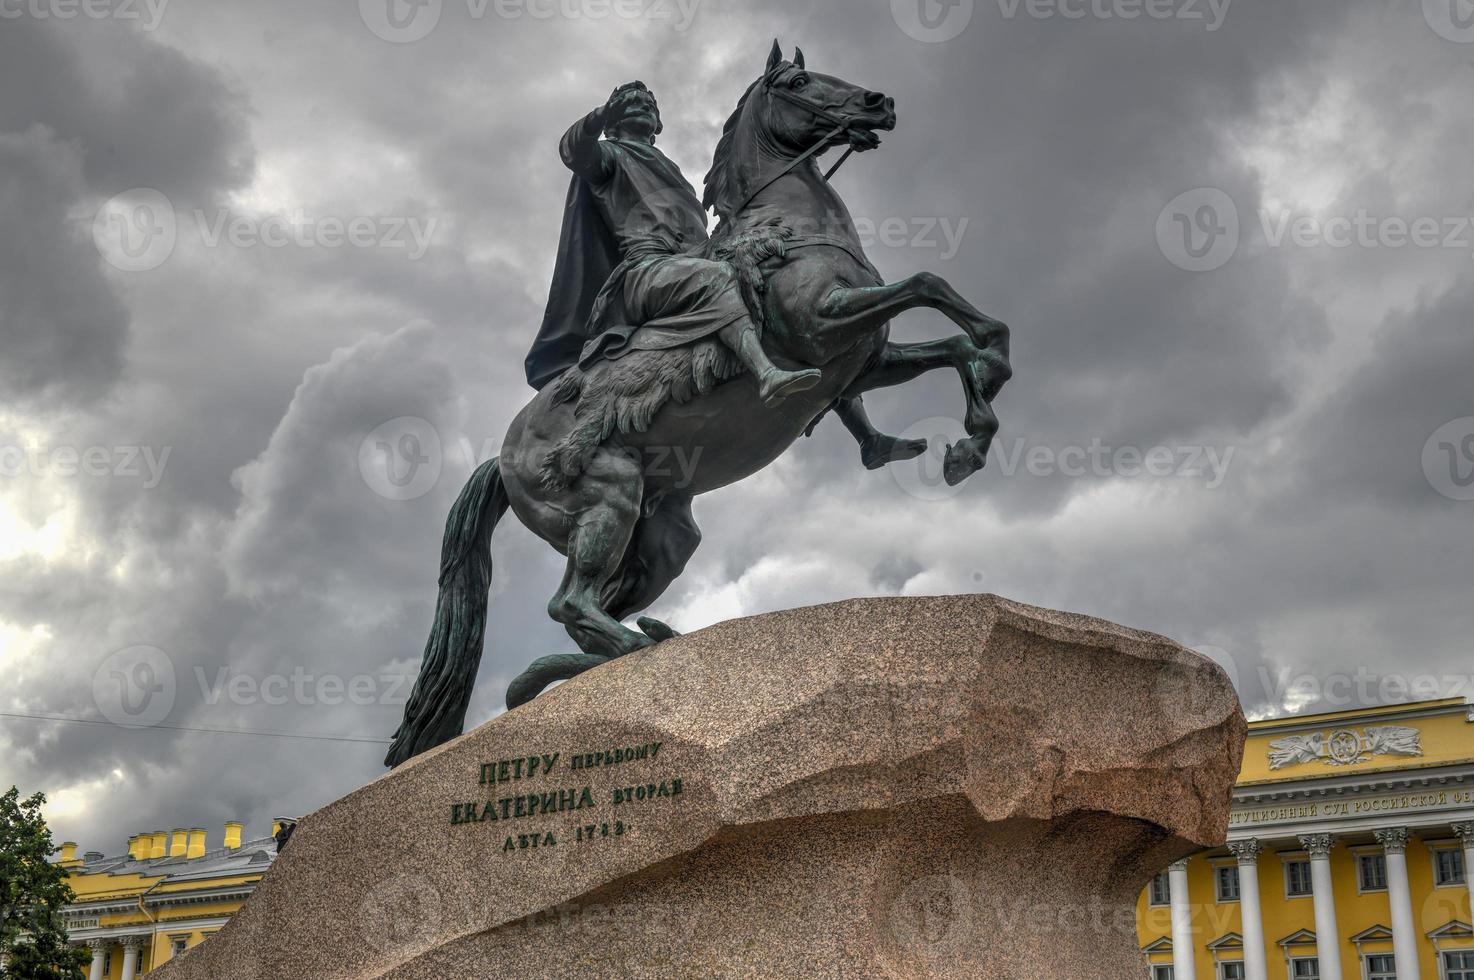 The Bronze Horseman  equestrian statue of Peter the Great in the Senate Square in Saint Petersburg, Russia. Commissioned by Catherine the Great, photo